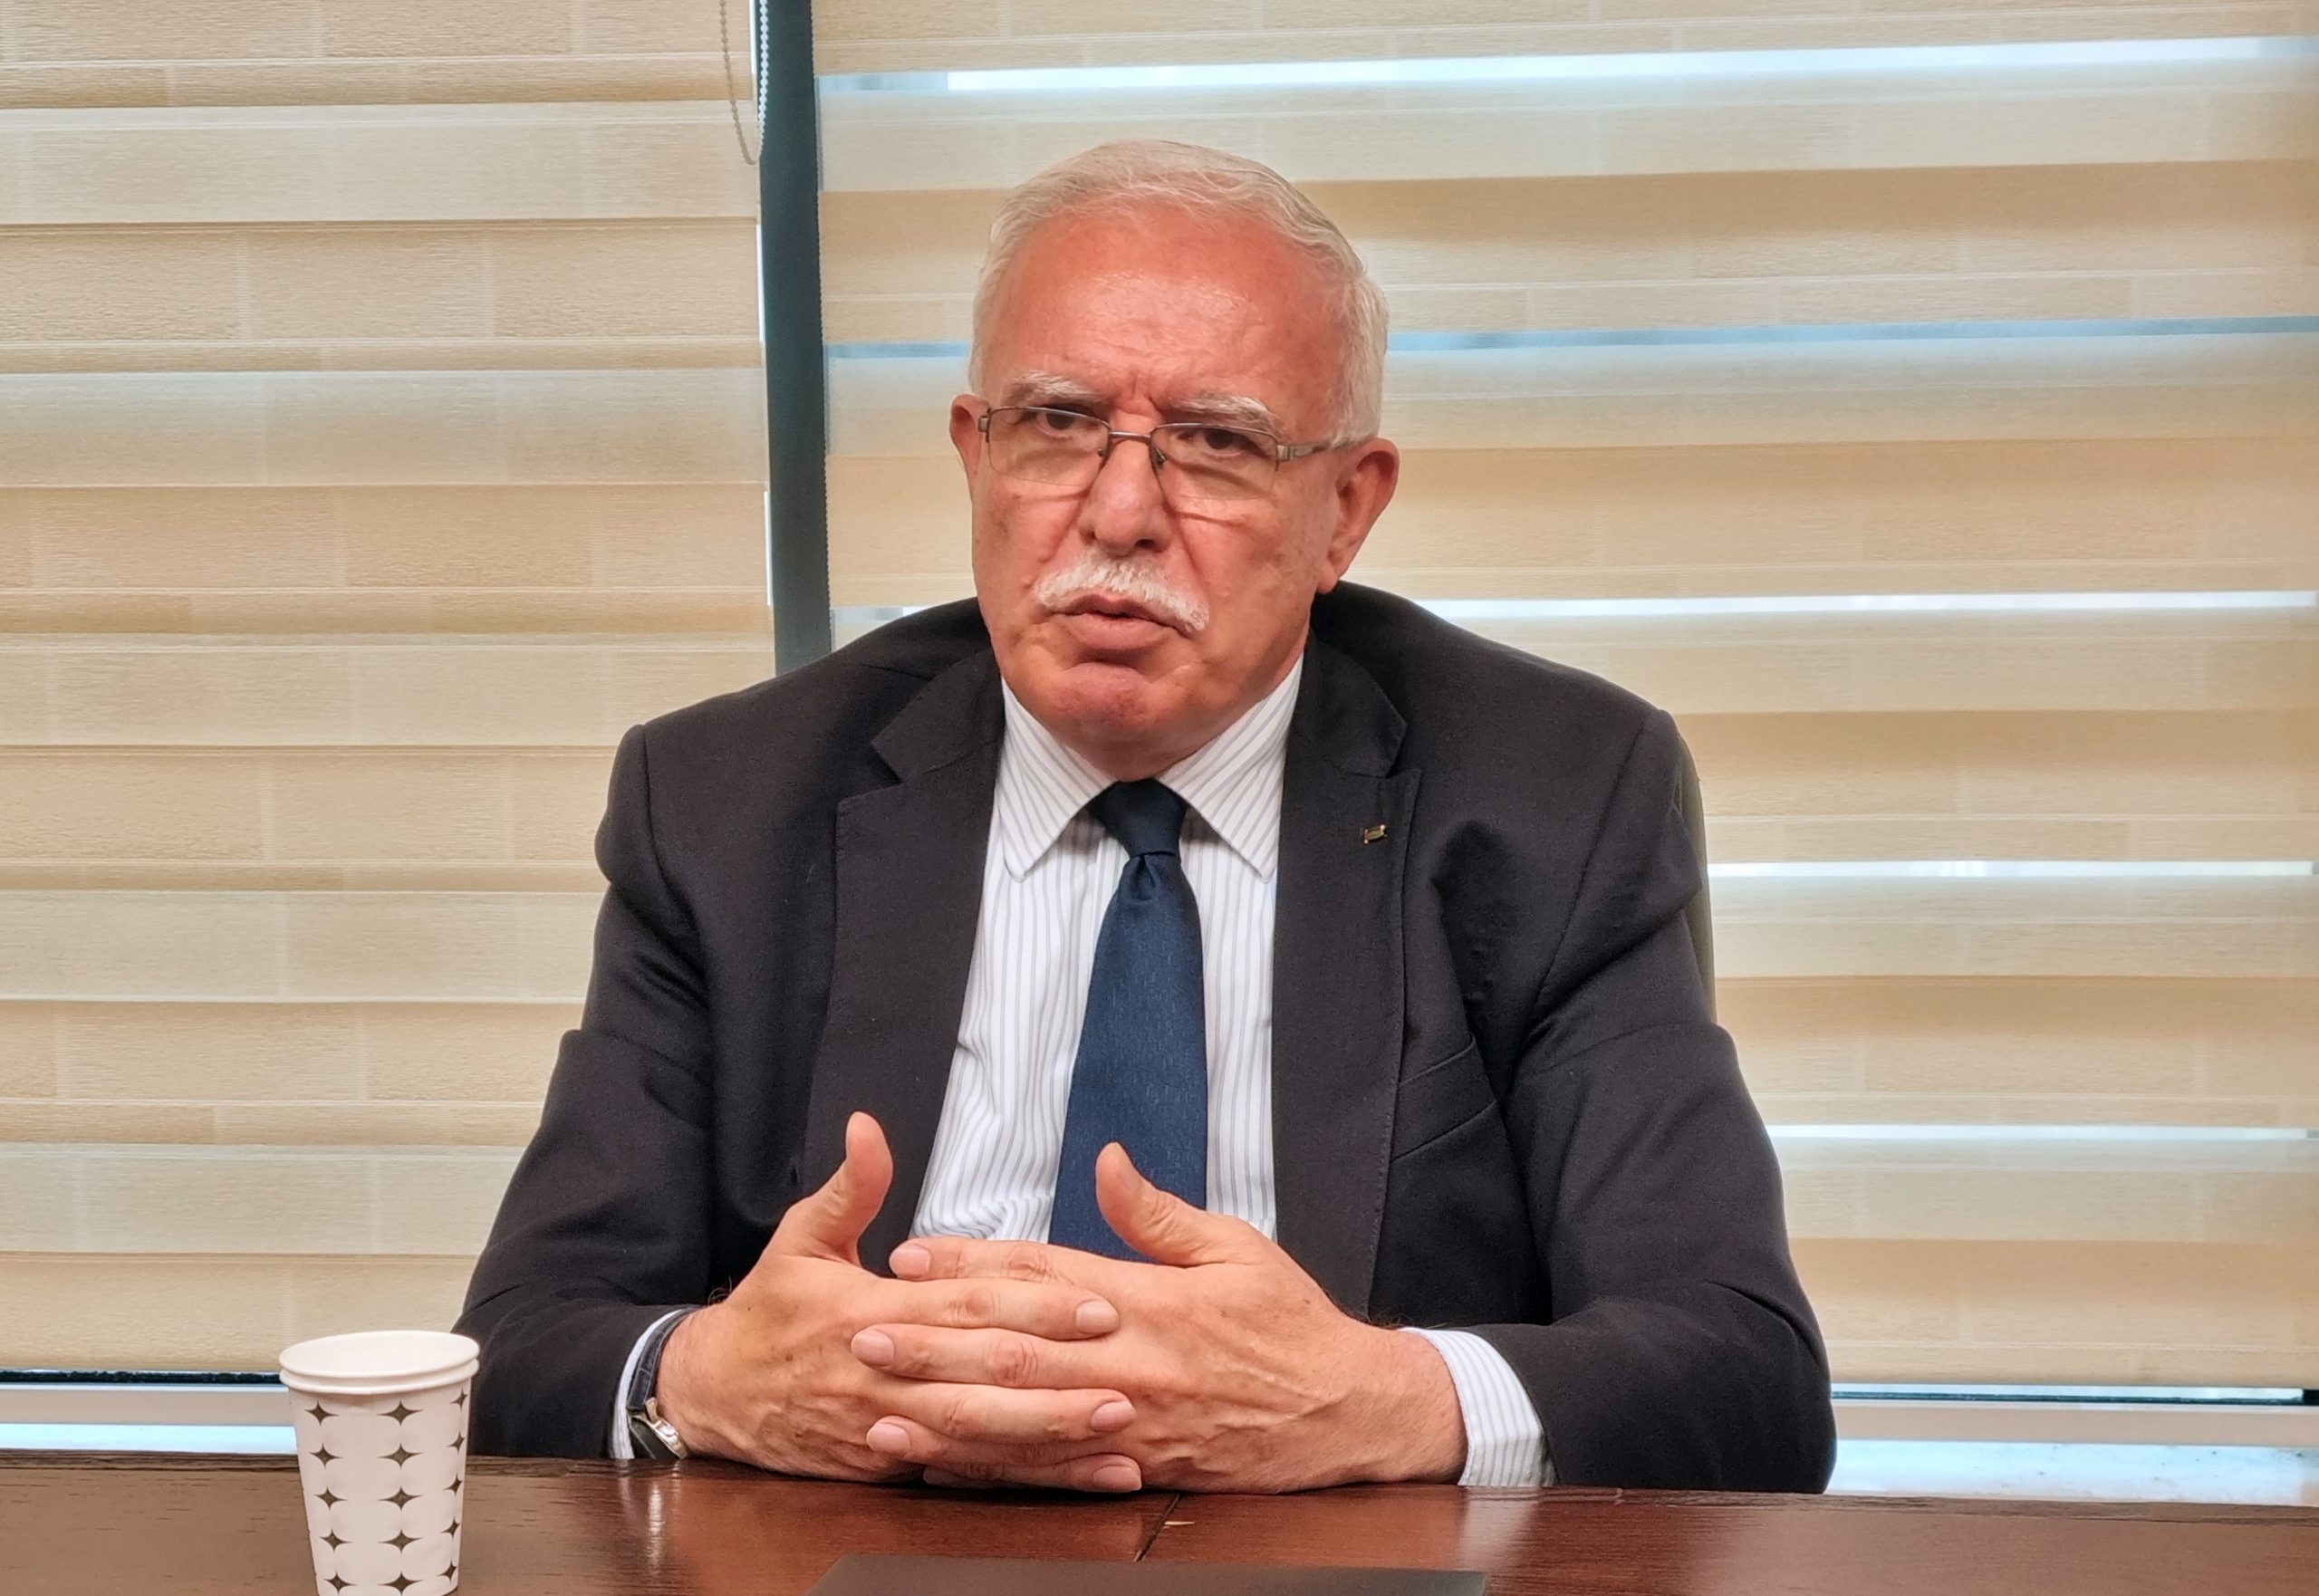 Palestine Report II. - Interview with Foreign Minister Riyad al-Maliki